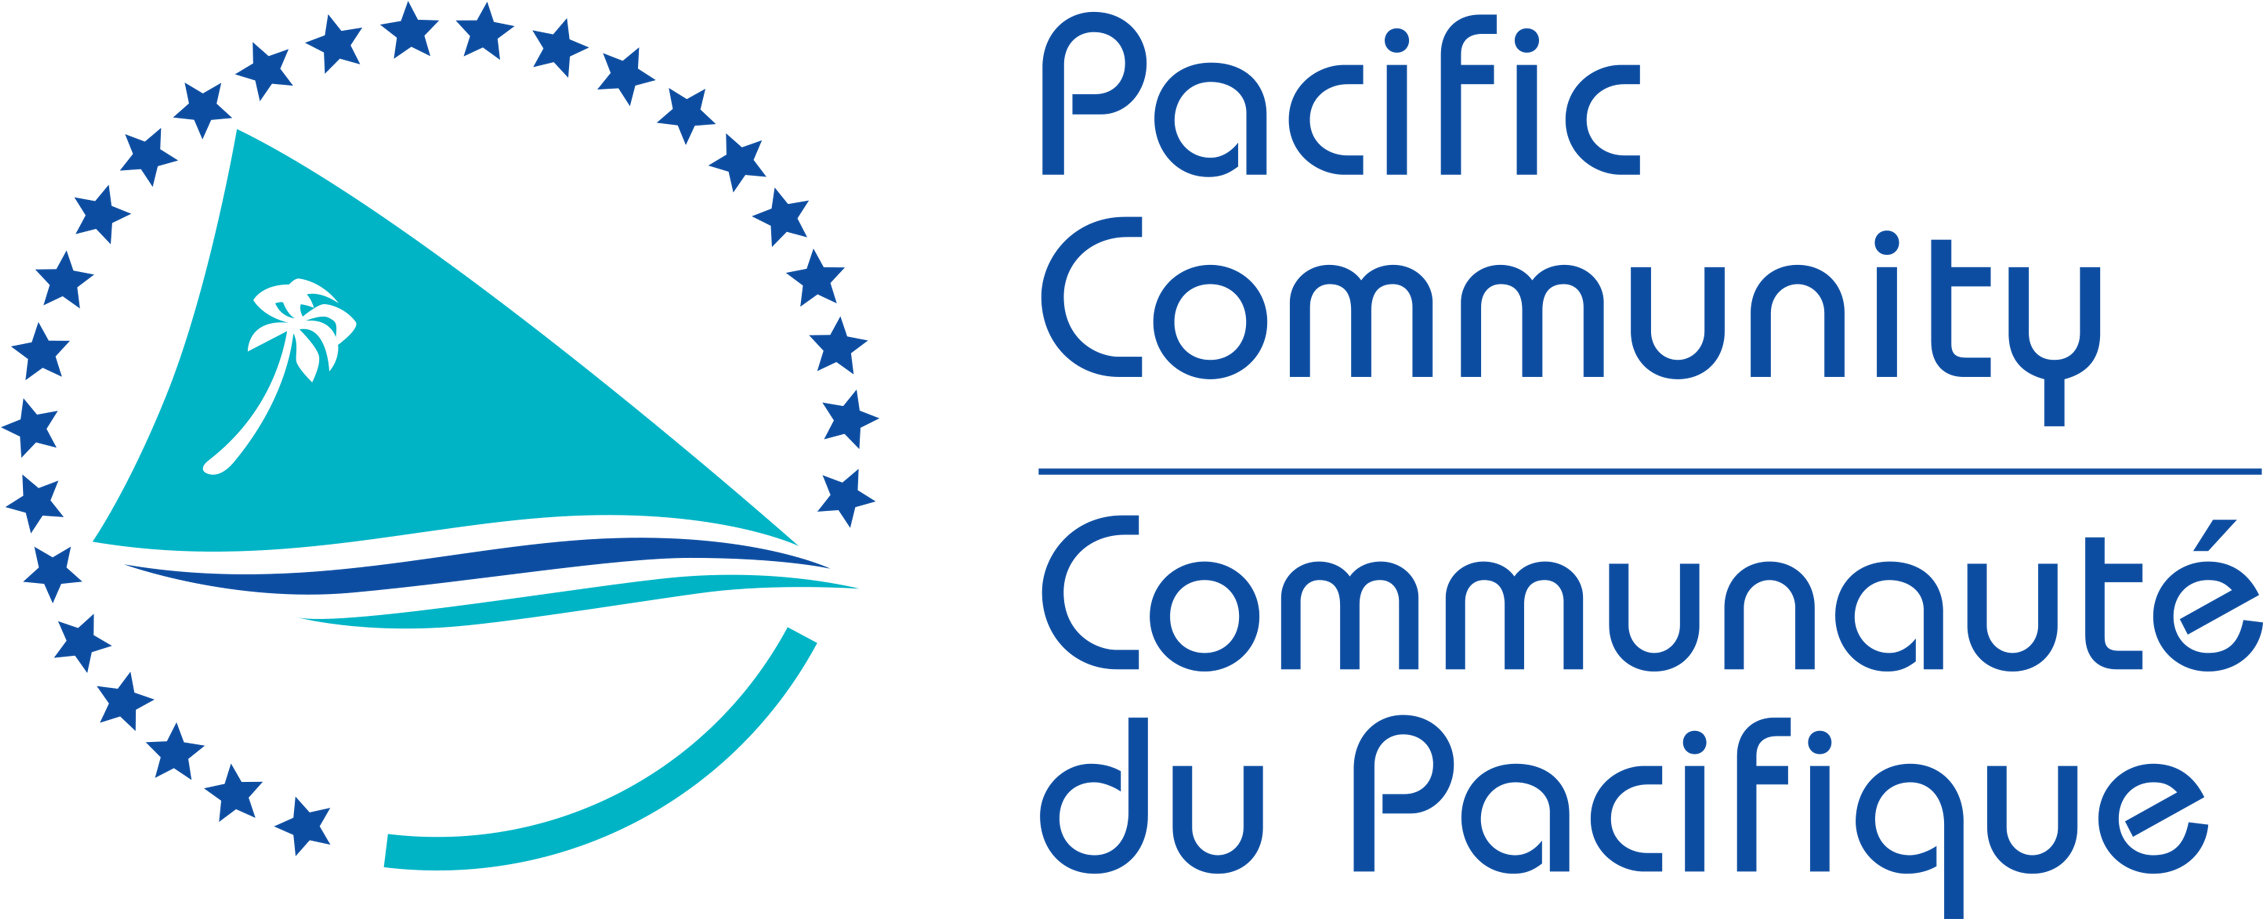 Spc Invites You To Please Participate In This Survey - Pacific Community (2575x1252)